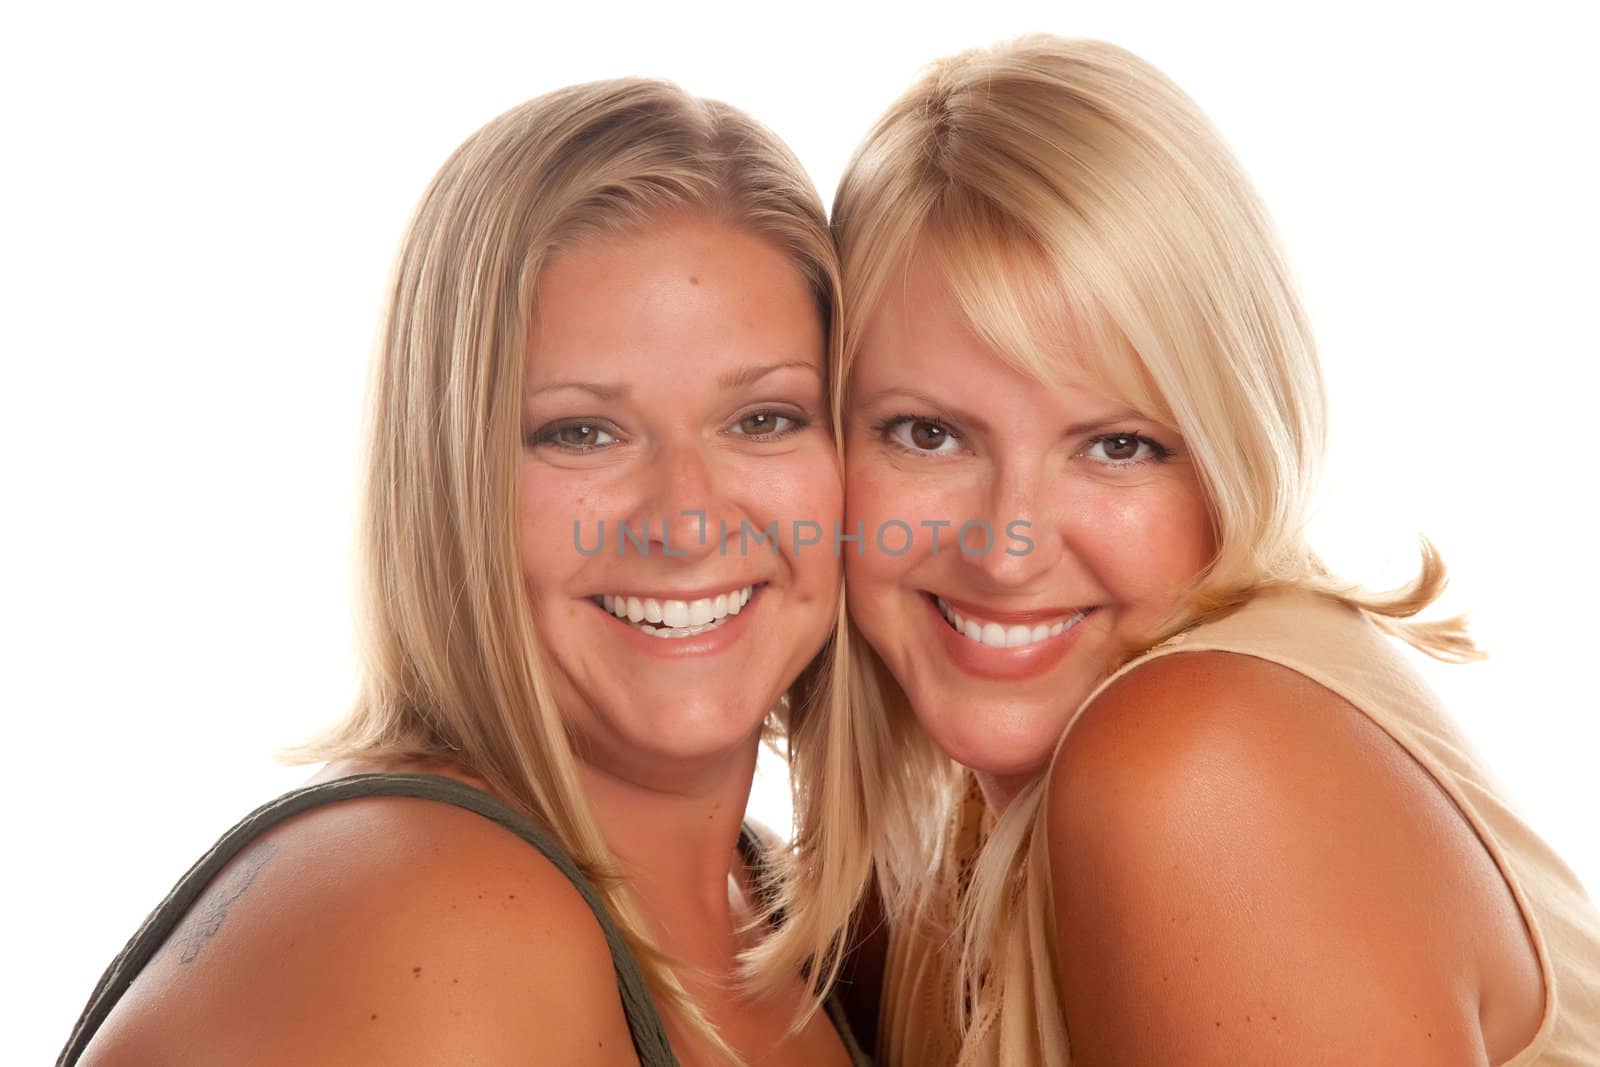 Two Beautiful Smiling Sisters Portrait by Feverpitched